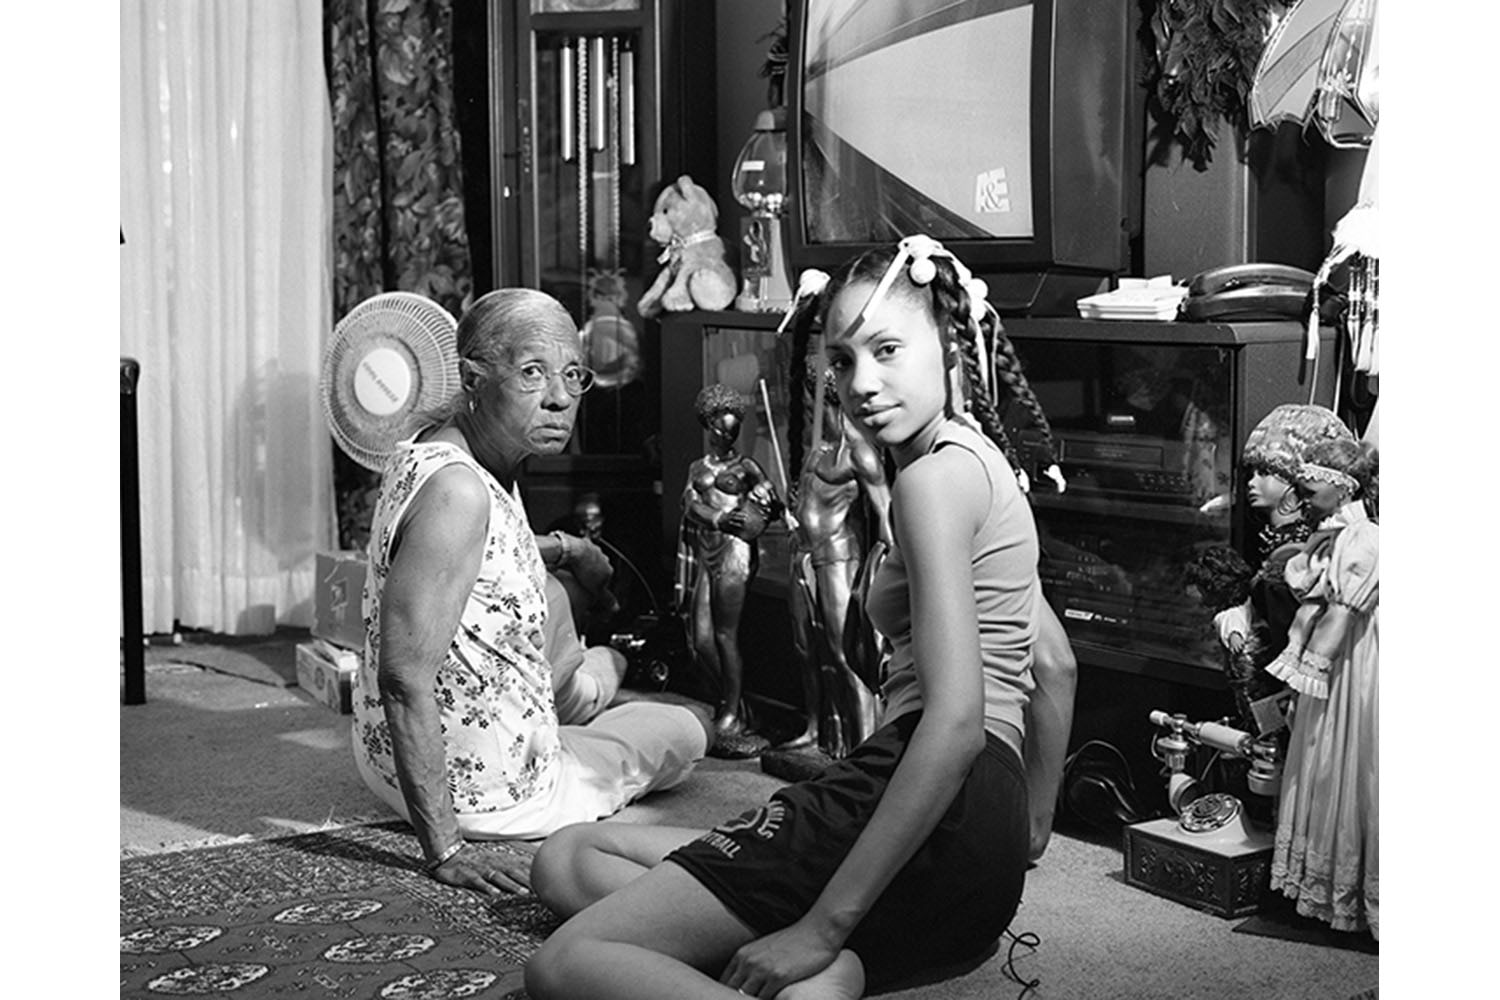 From LaToya Ruby Frazier's <em>The Notion of a Family</em> published by Aperture (LaToya Ruby Frazier—Aperture)